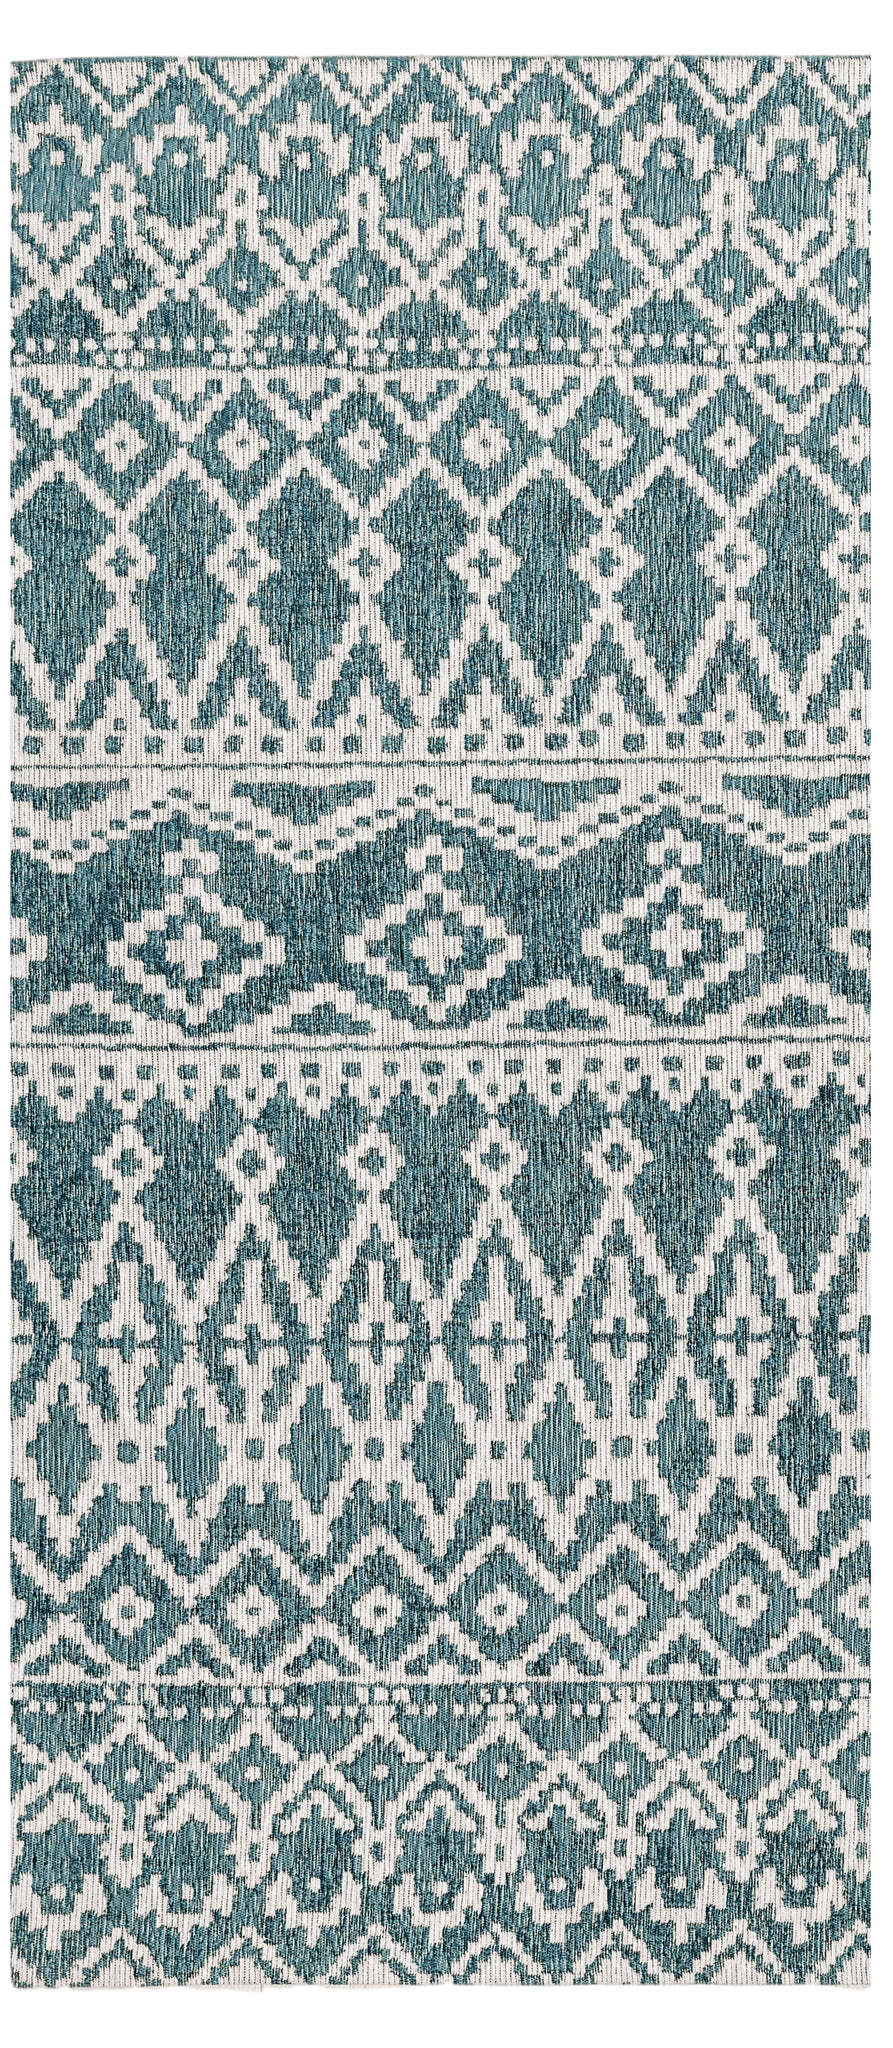 Washable Area rug | The Rugger Classic | Teal & White | 3x7 | By MotherRuggers.com | Machine Washable | Jacquard Woven | Pet Friendly | Kid Friendly | Machine Wash | Line Dry | Living Room | Kitchen | Bedroom | High-Traffic | Anti-Slip | Three-year warranty with proper care | Shake or light Vacuum | Machine Wash as needed | Dry Flat or Line Dry | Dries fast